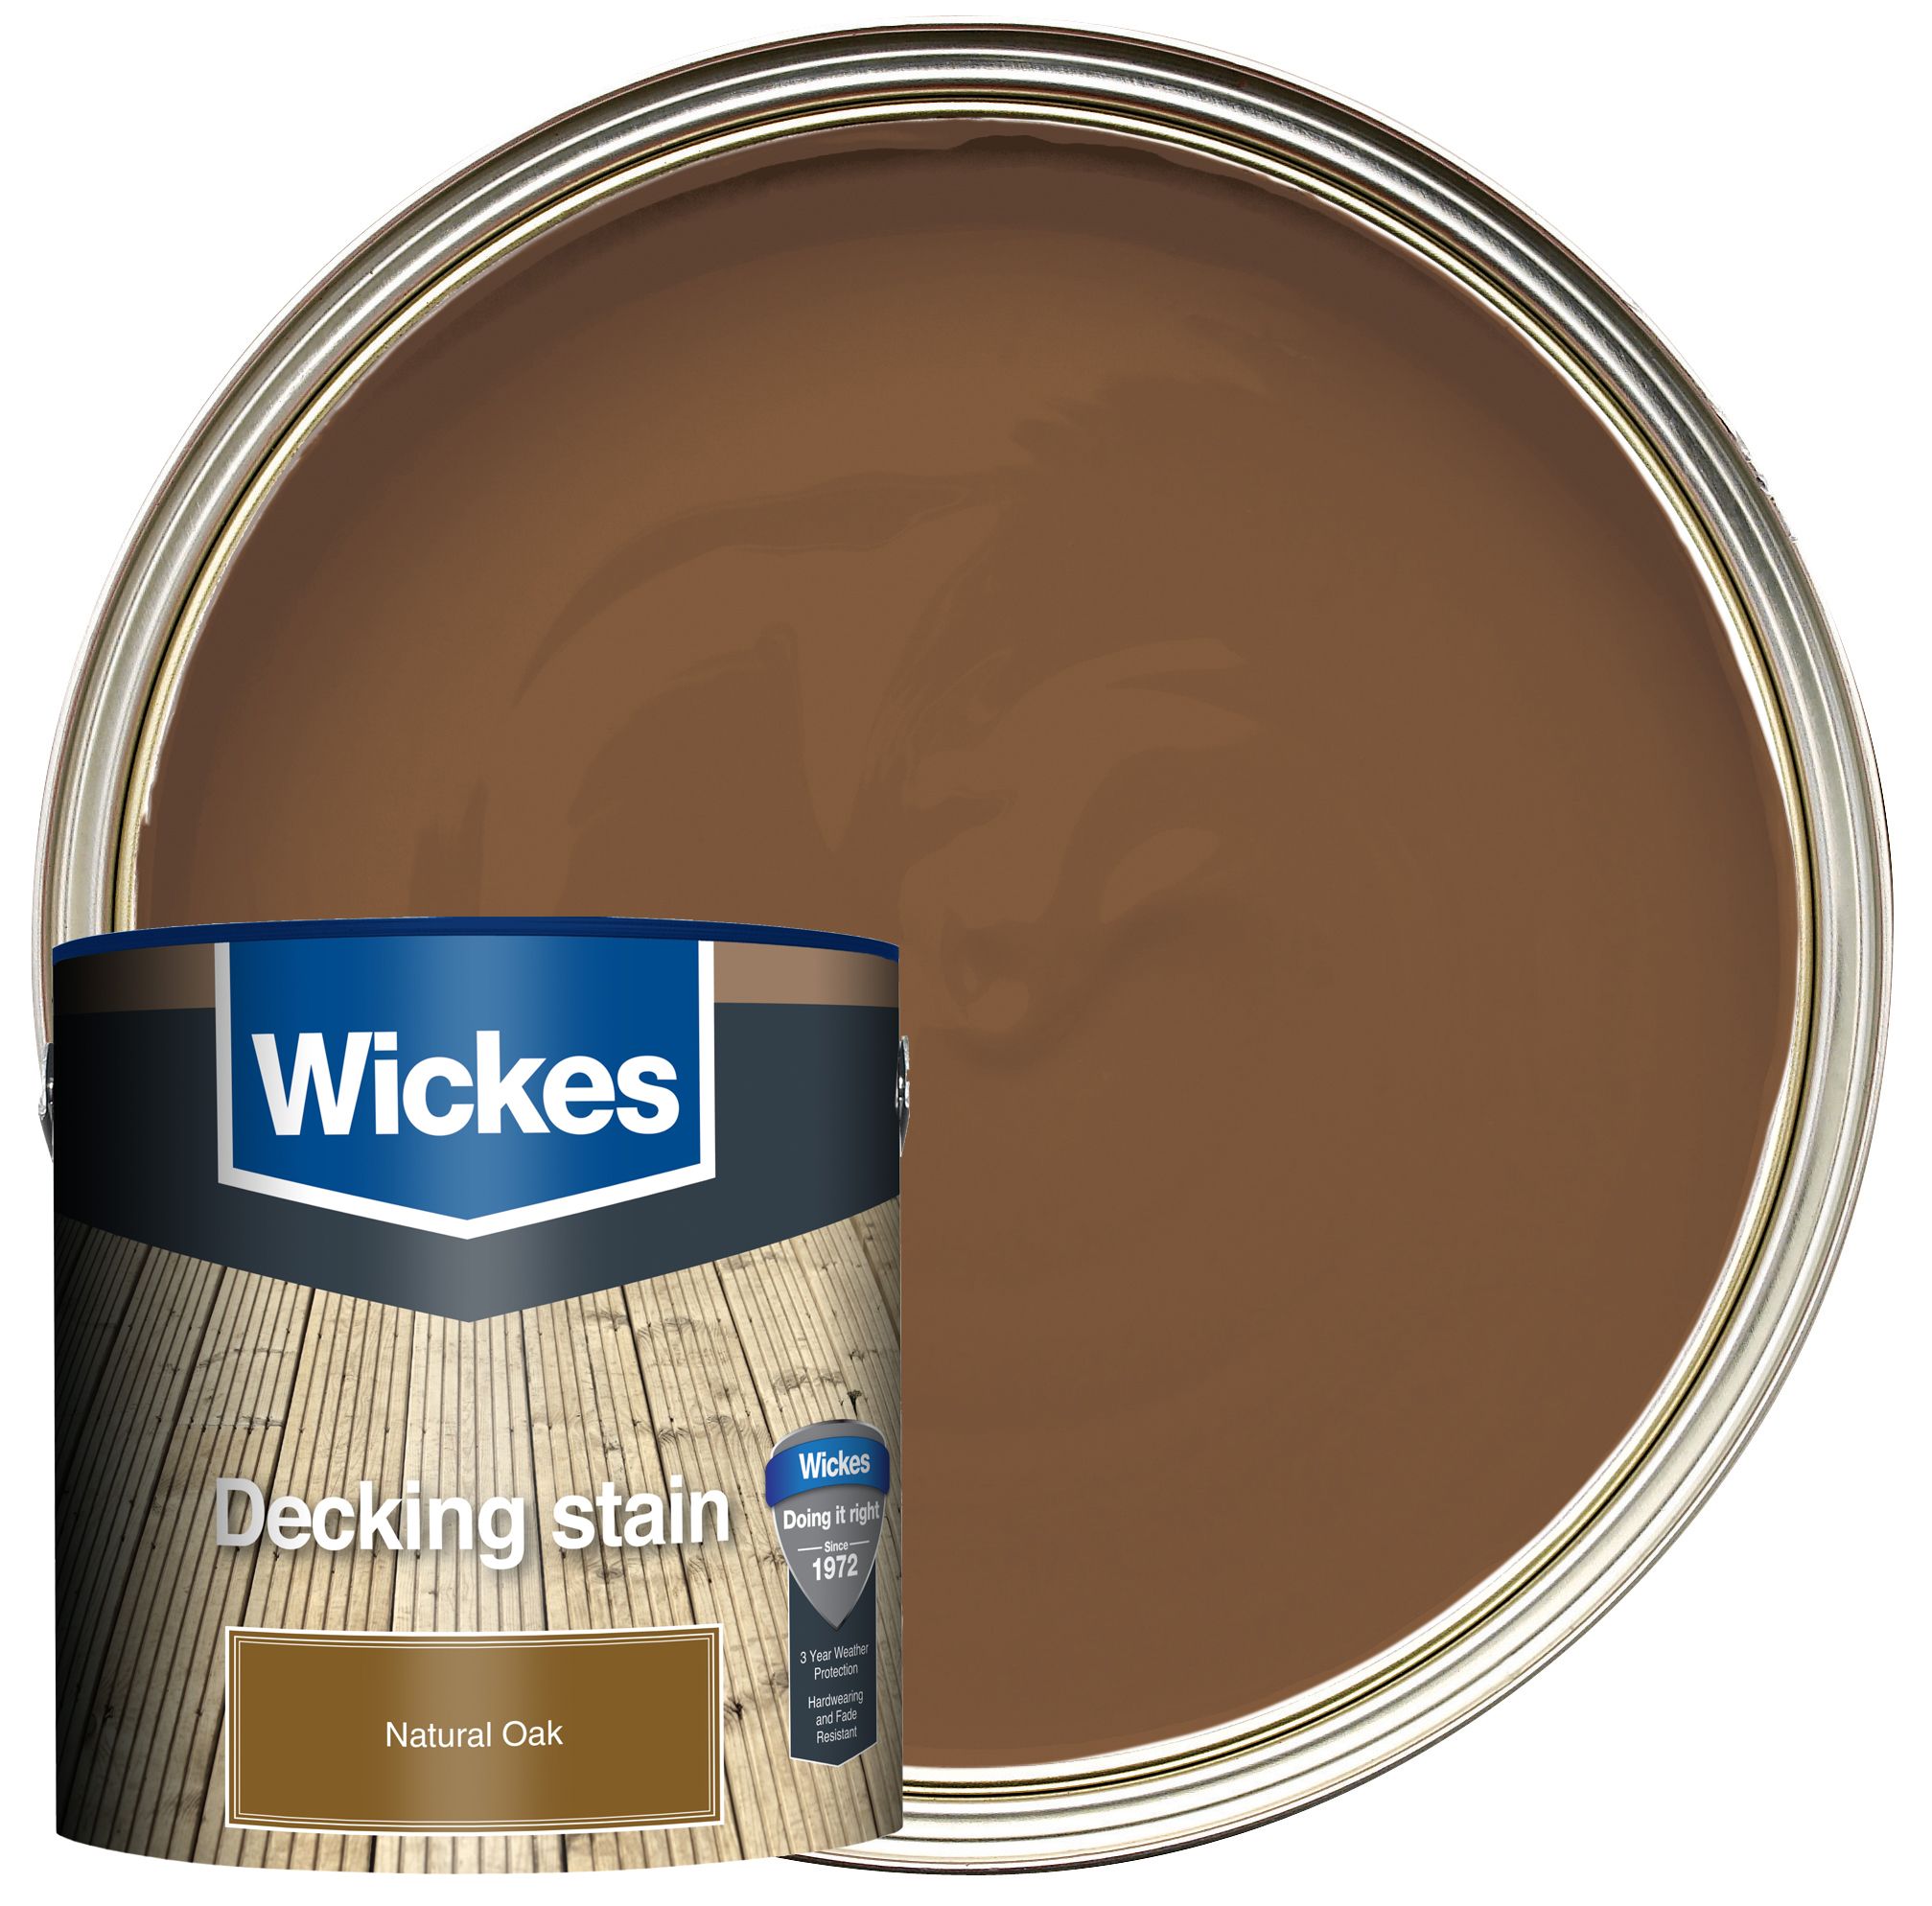 Image of Wickes Decking Stain - Natural Oak 2.5L